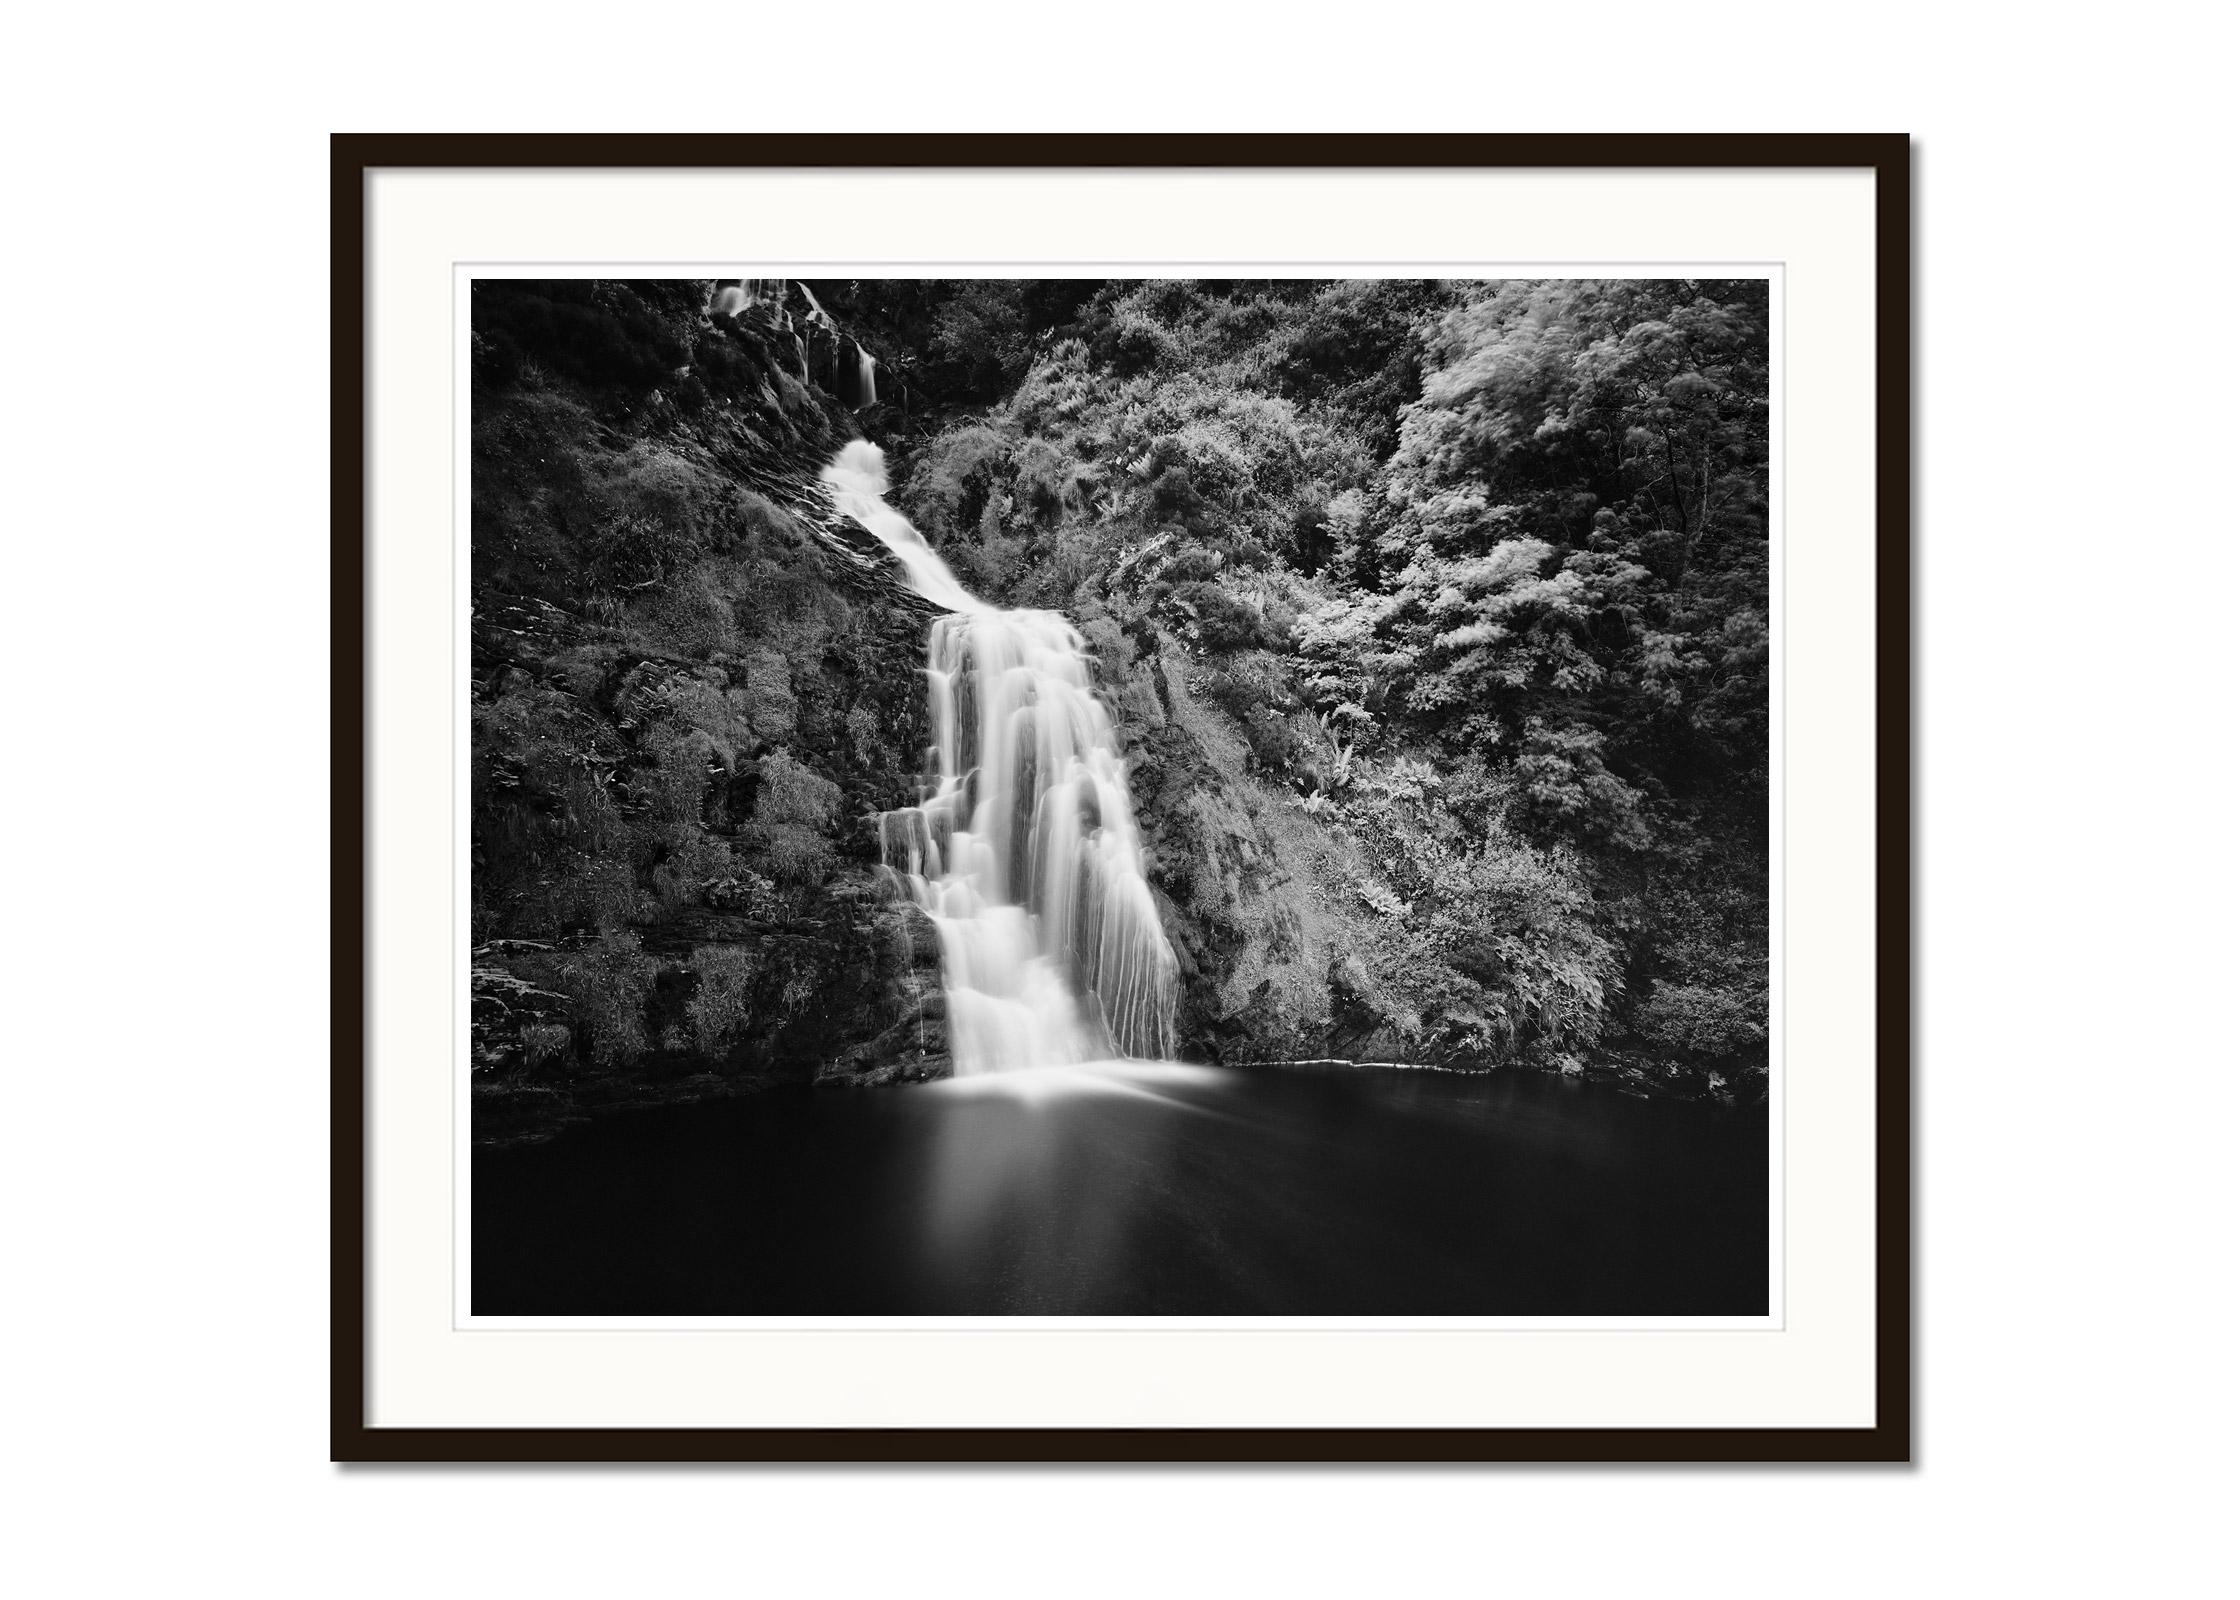 Waterfall, Ireland, black and white art photography, waterscape, long exposure  - Contemporary Photograph by Gerald Berghammer